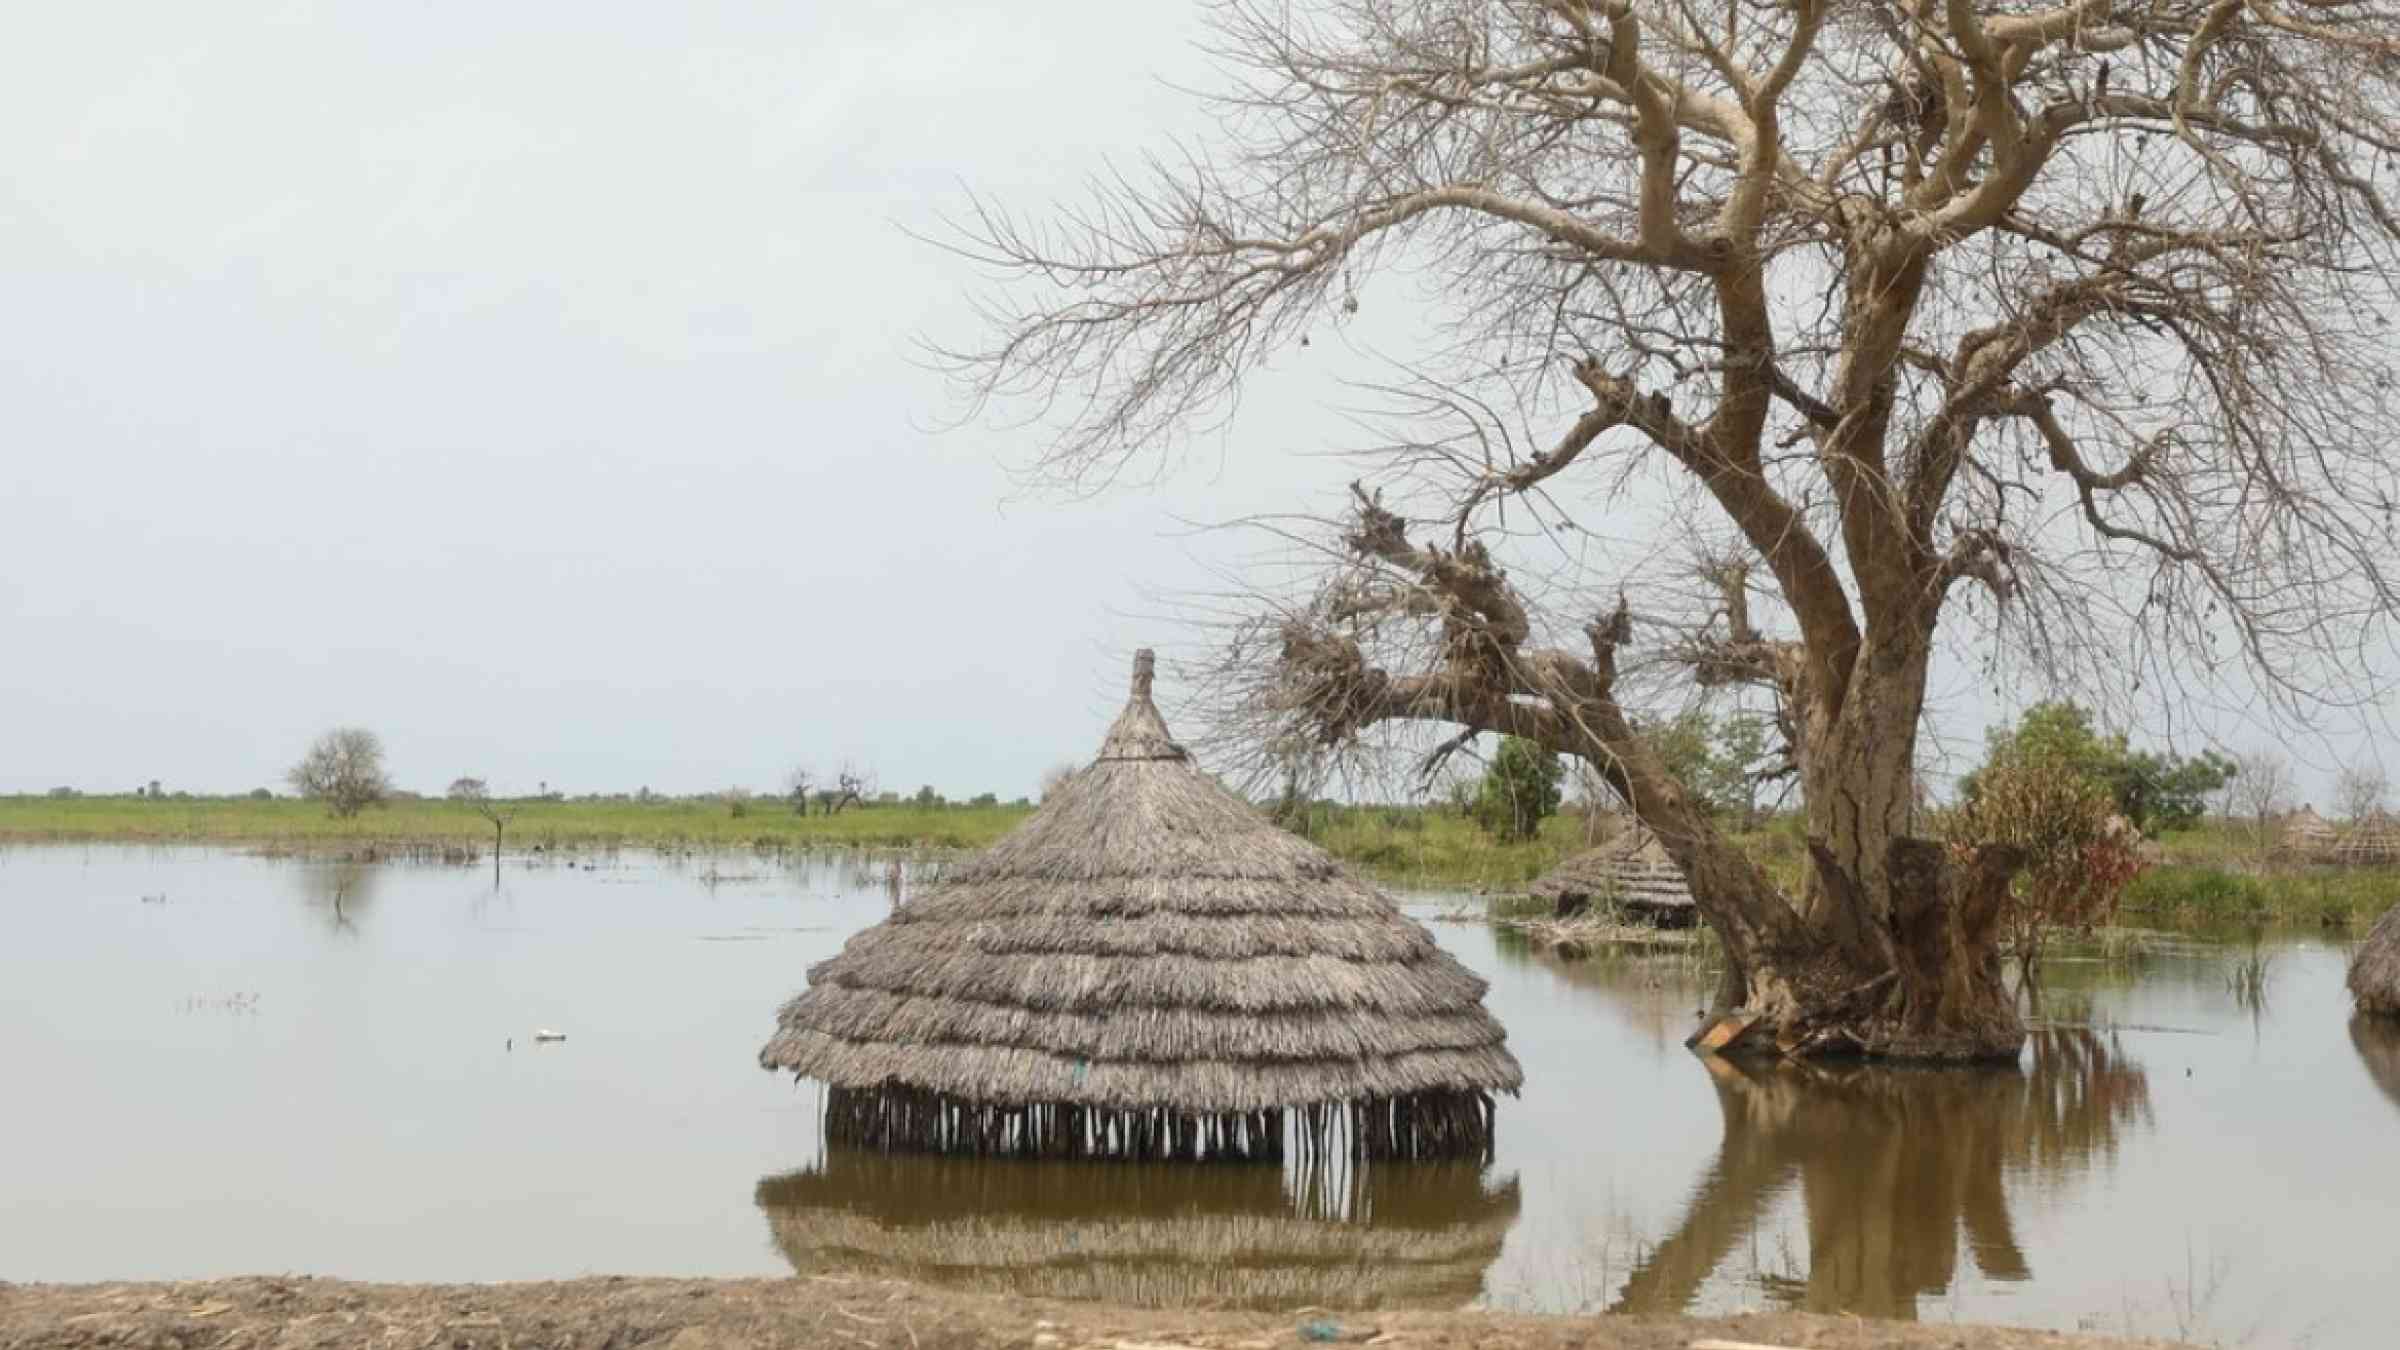 An inundated village in South Sudan